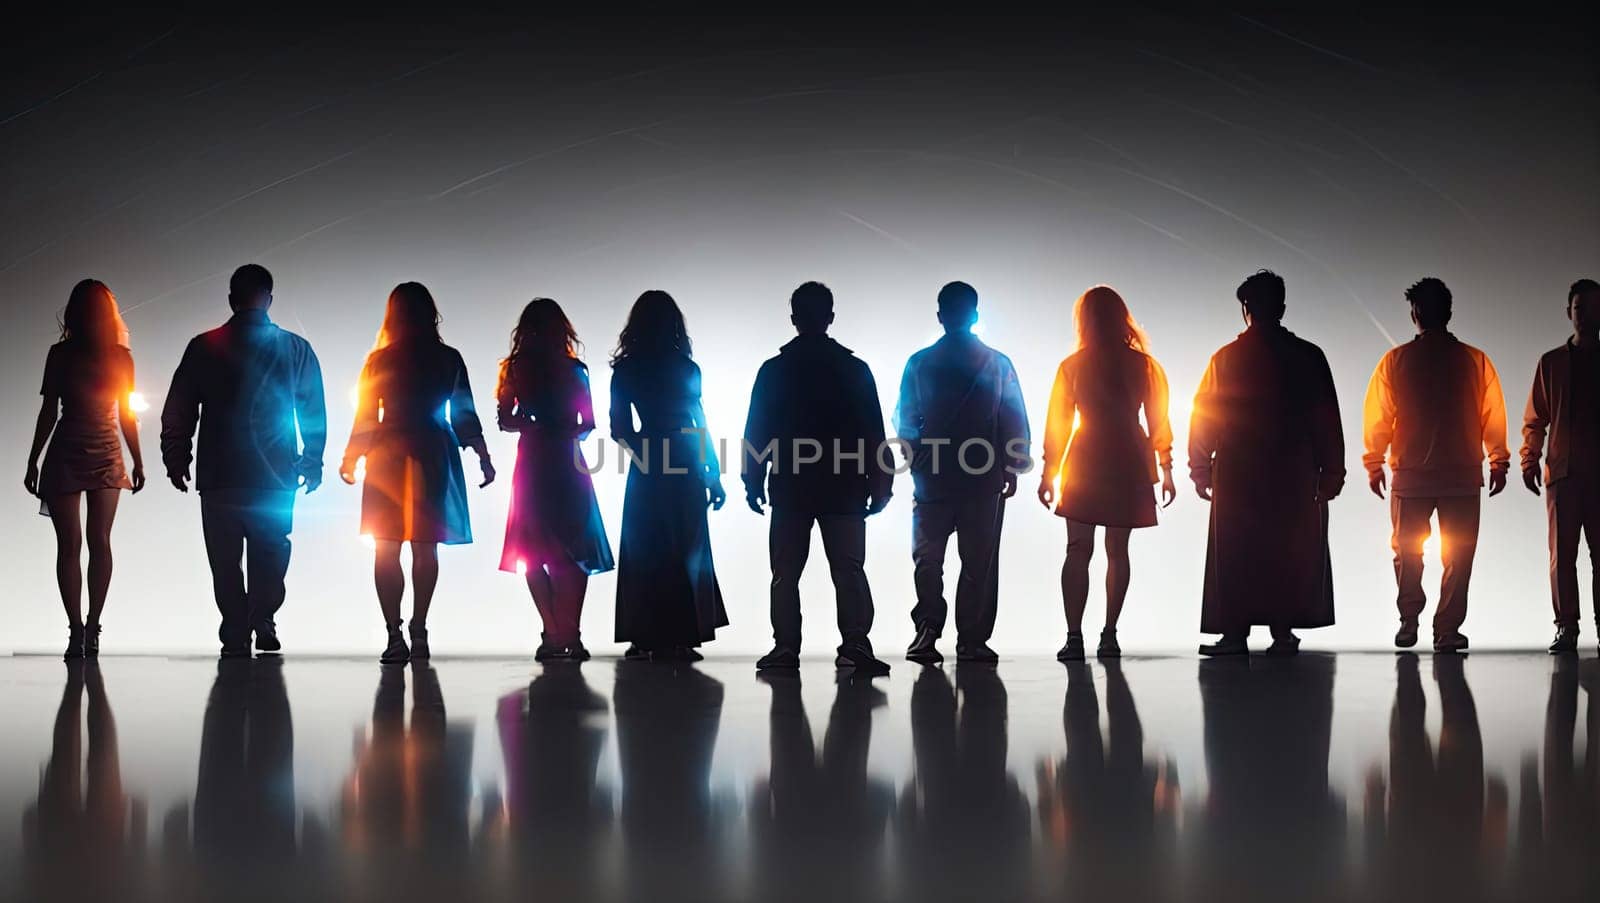 Glowing silhouettes of women and men by applesstock